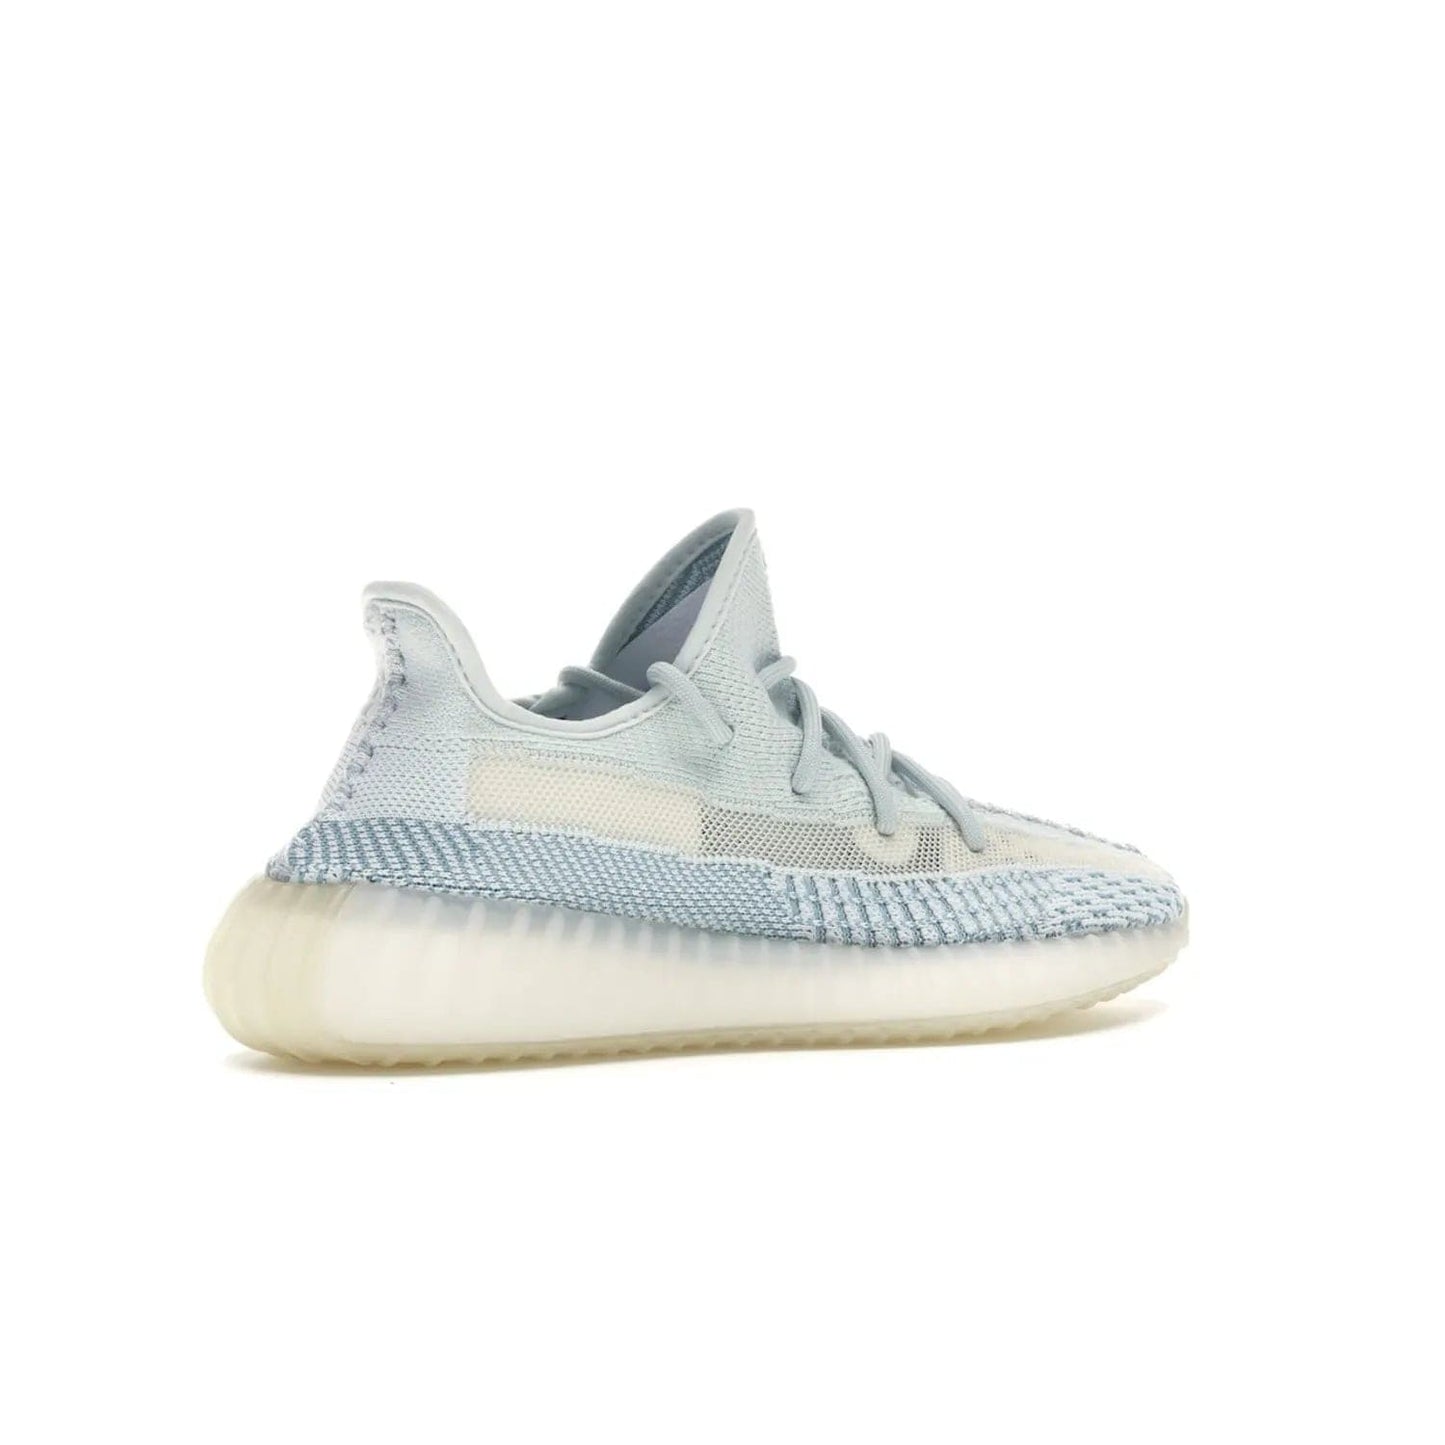 adidas Yeezy Boost 350 V2 Cloud White (Non-Reflective) - Image 34 - Only at www.BallersClubKickz.com - Uniquely designed adidas Yeezy Boost 350 V2 Cloud White (Non-Reflective) with a Primeknit upper in shades of cream and blue with a contrasting hard sole. A fashion-forward sneaker with a transparent strip and blue-and-white patterns.